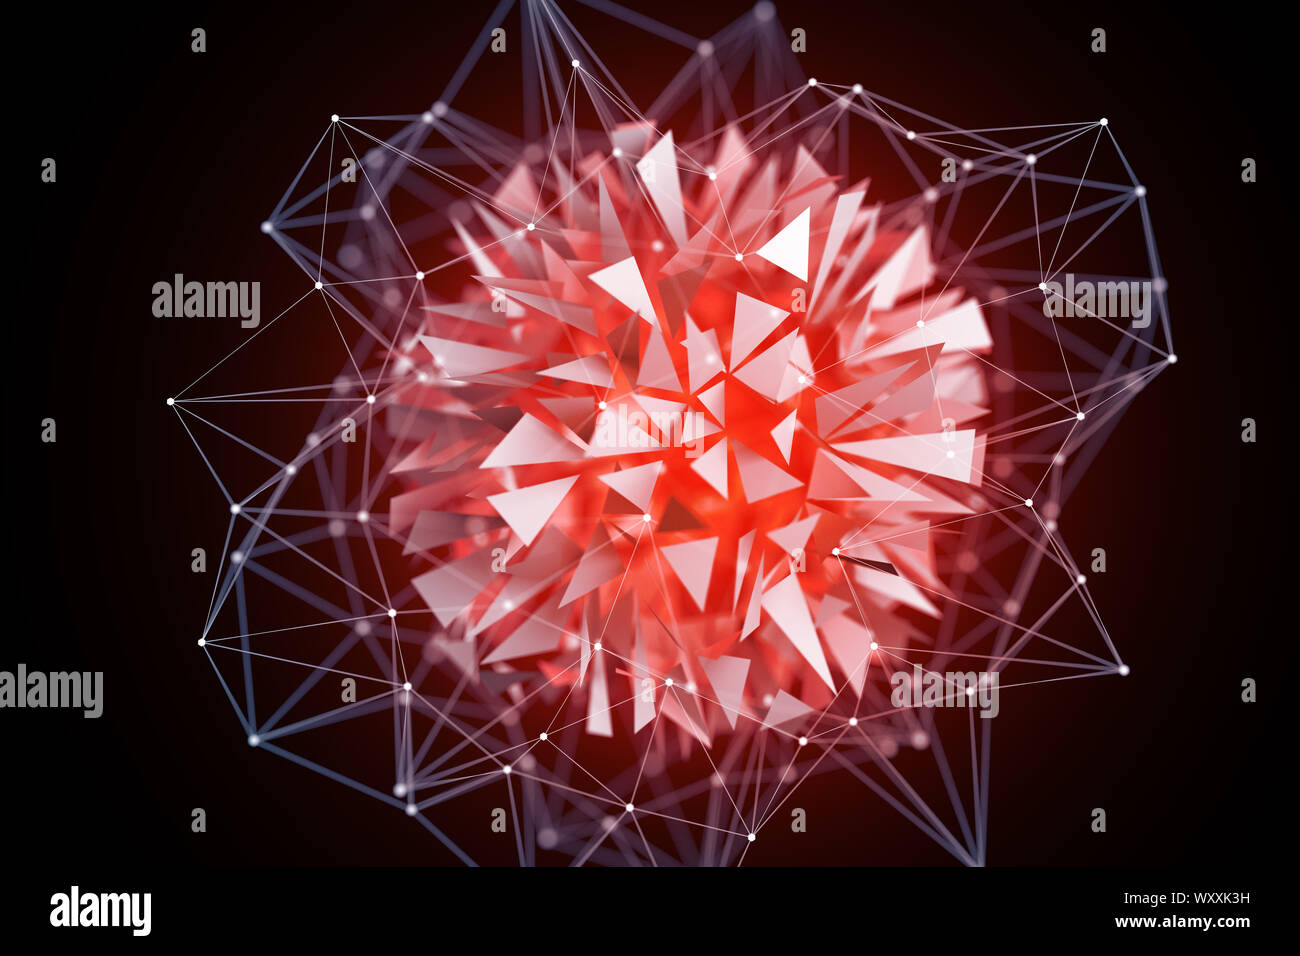 3D Illustration Rendering. Red glowing Sphere orb with shattered glass rising behing a white 3D grid. Abstract creative tech design Background. Stock Photo